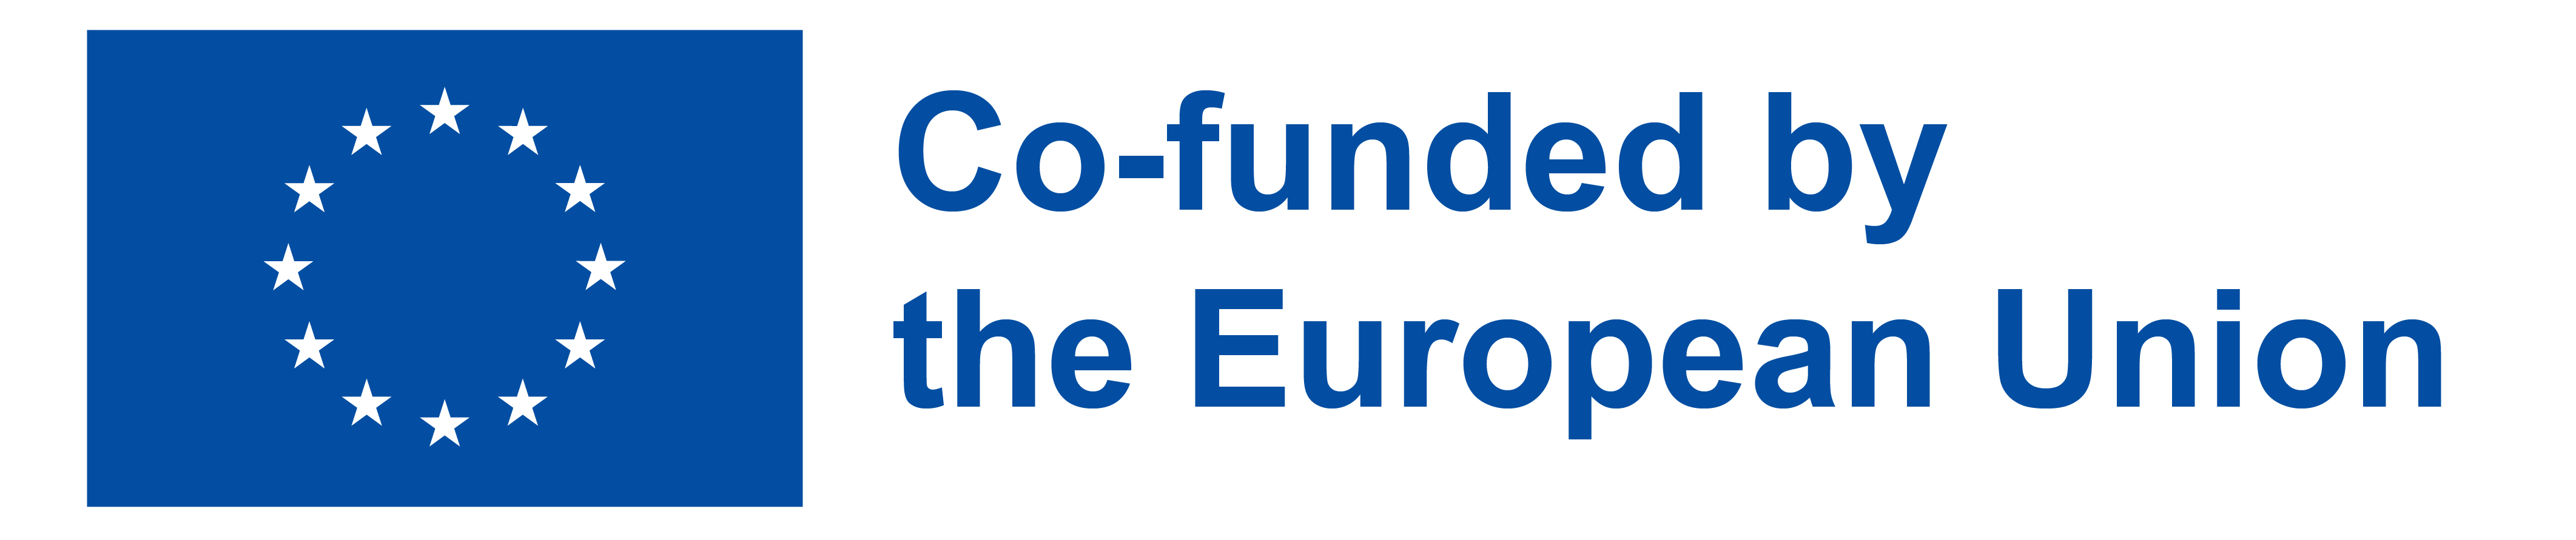 Co- funded by the European Union logo